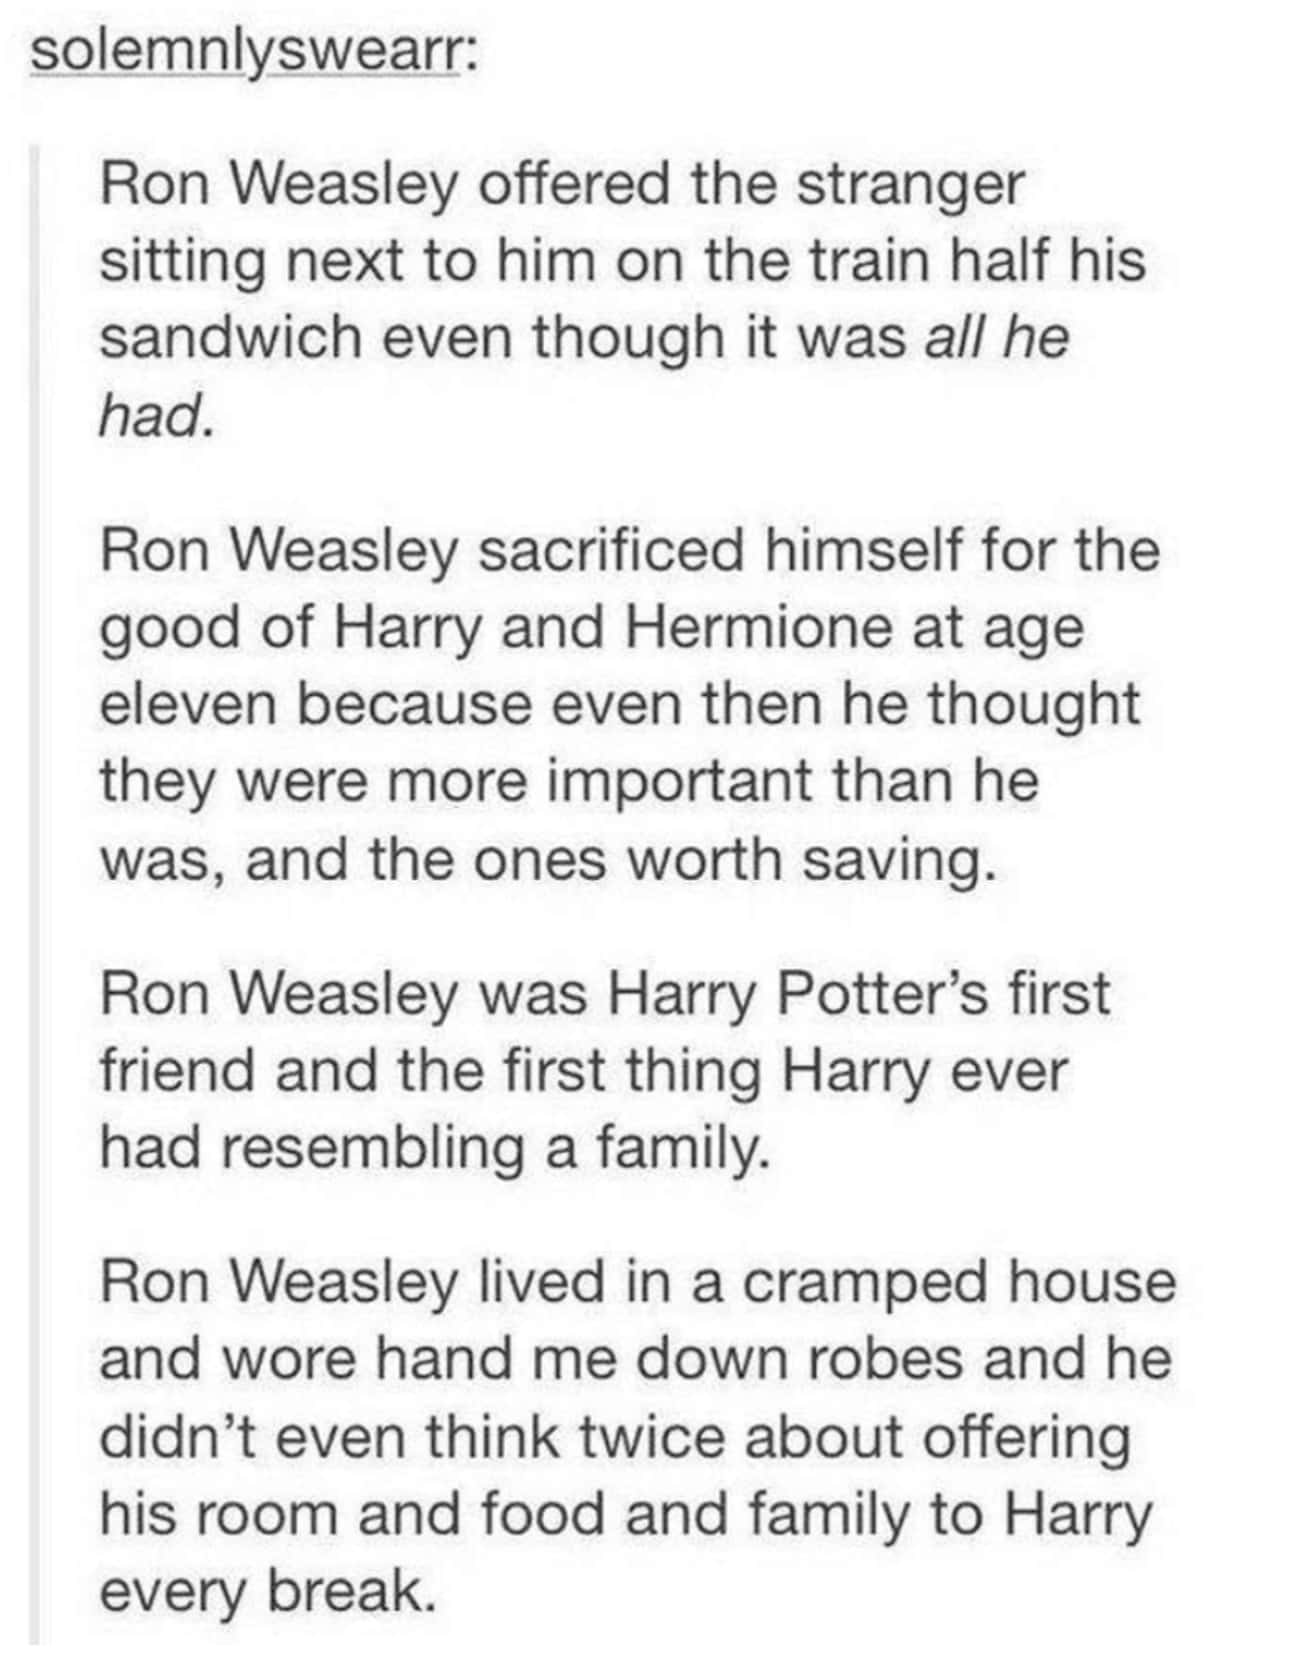 Ron's Selflessness Goes Underappreciated